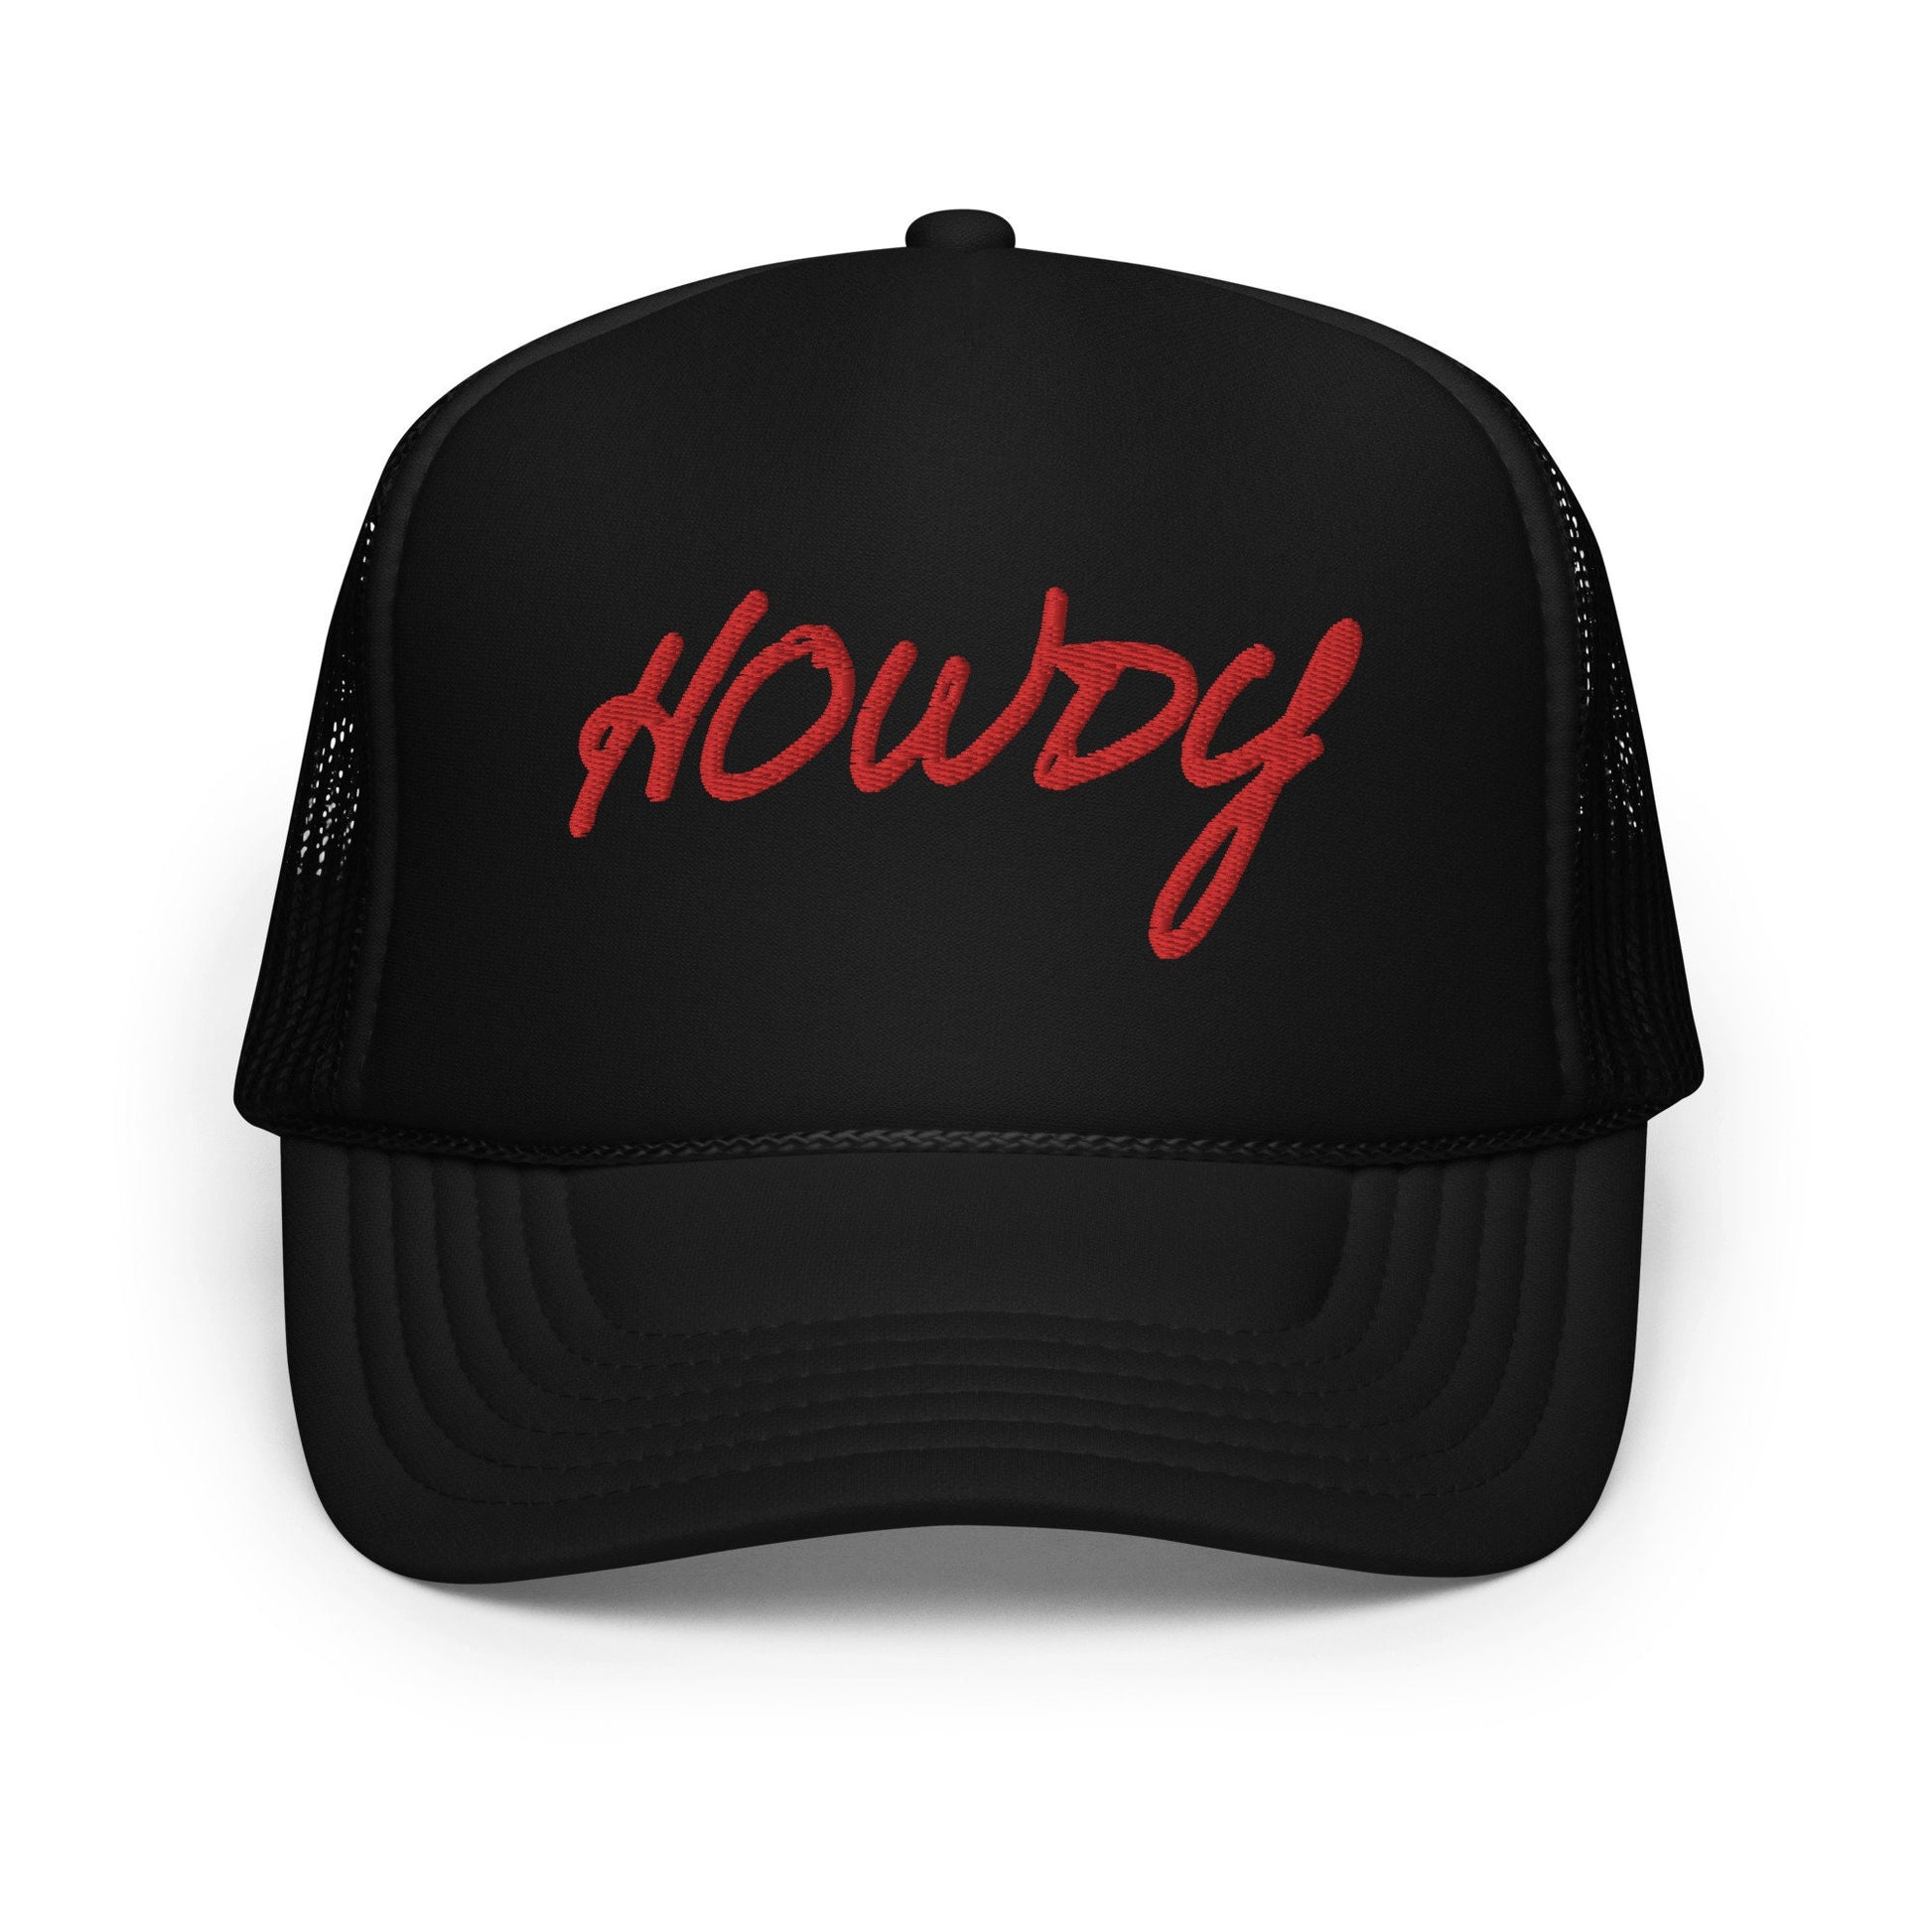 Howdy - Classic Red Stitching Trucker Hat